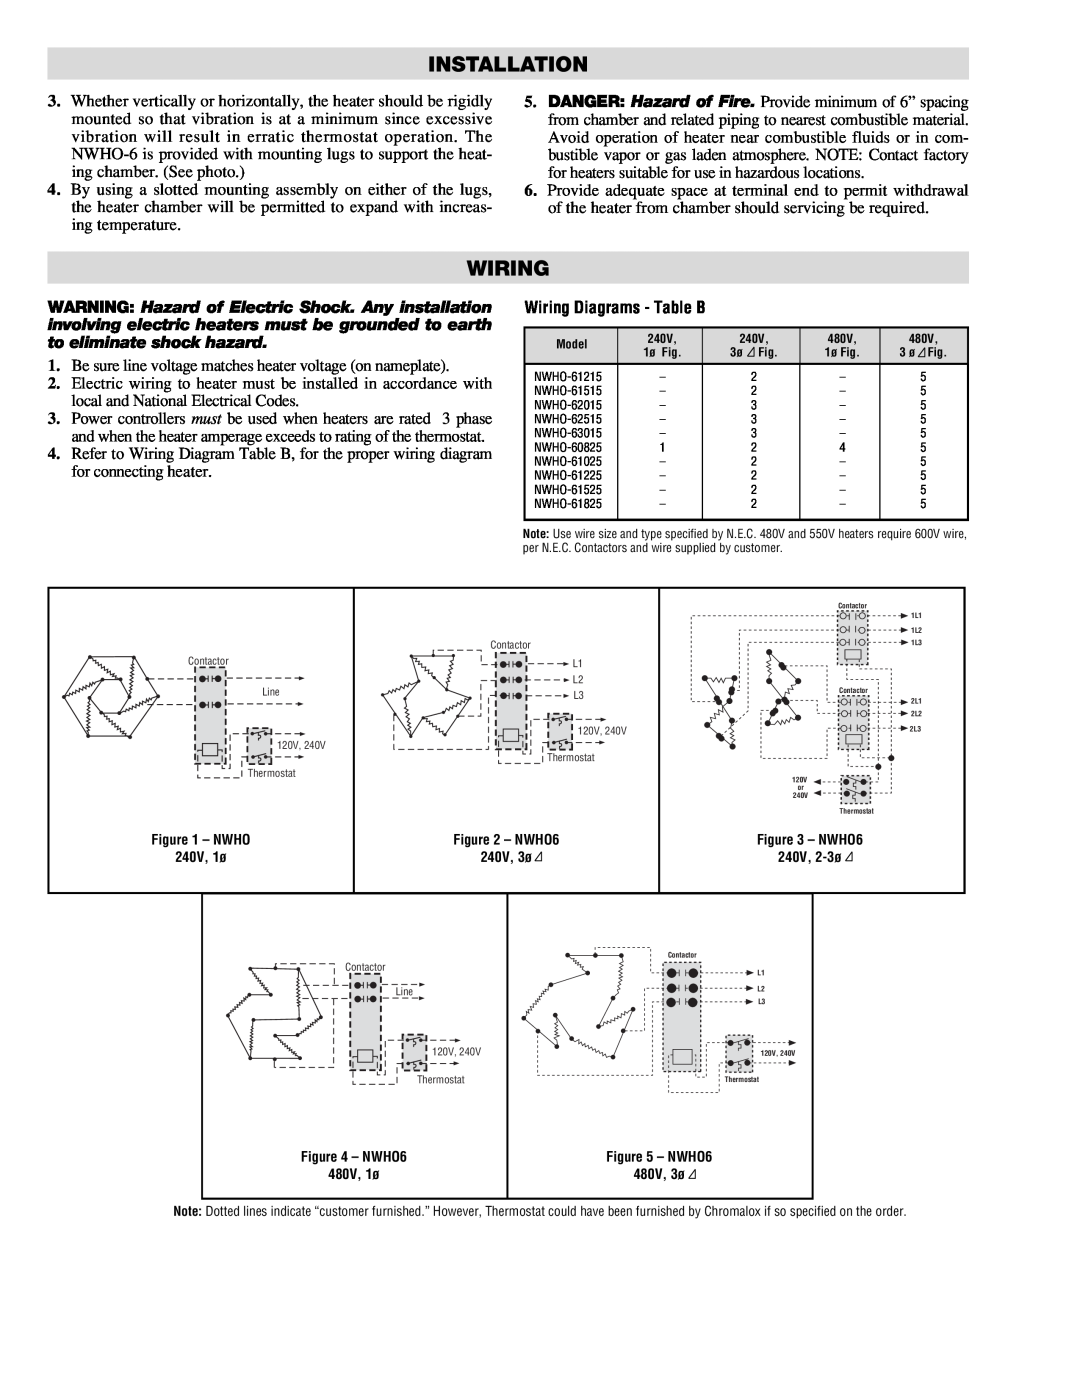 Chromalox NWHO-6 installation instructions Wiring Diagrams - Table B, Installation 